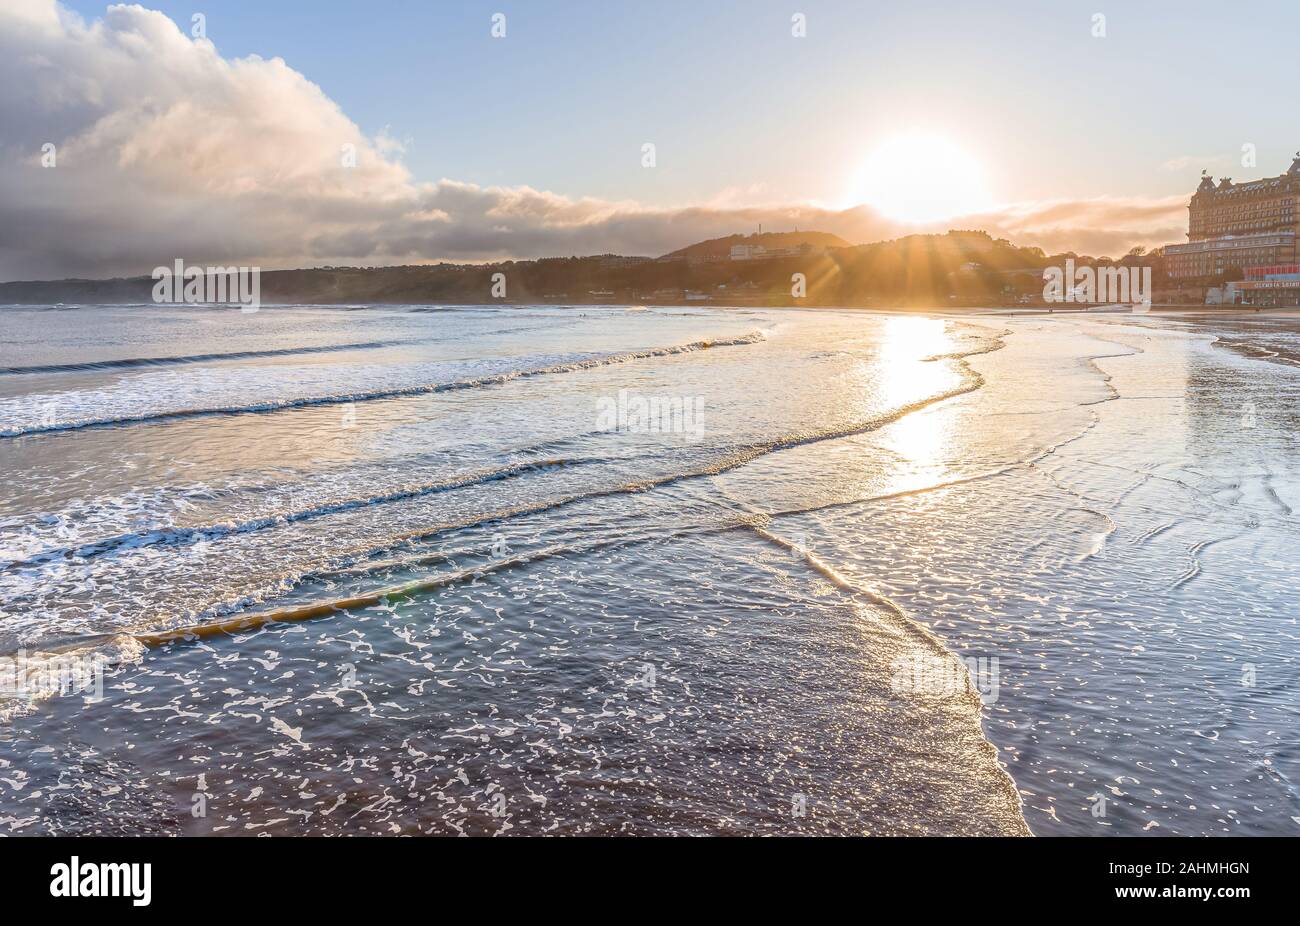 South Beach at Scarborough looking towards the sun.  Waves lap onto the shore with buildings reflected in the wet sand. Hills are in the distance. Stock Photo